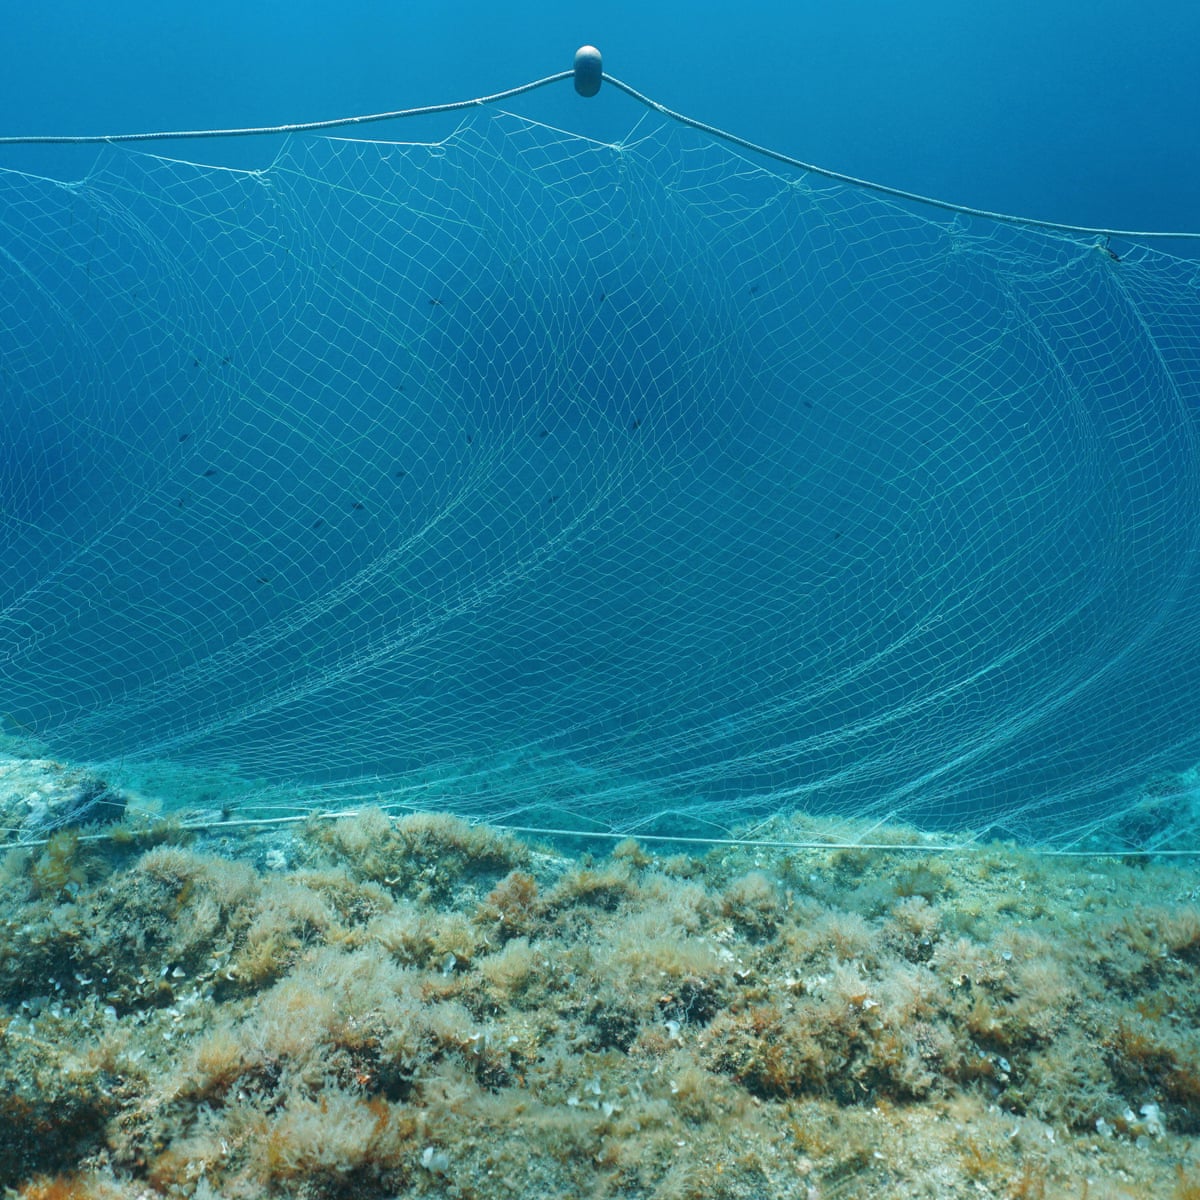 Dumped fishing gear is killing marine life. Yet no governments